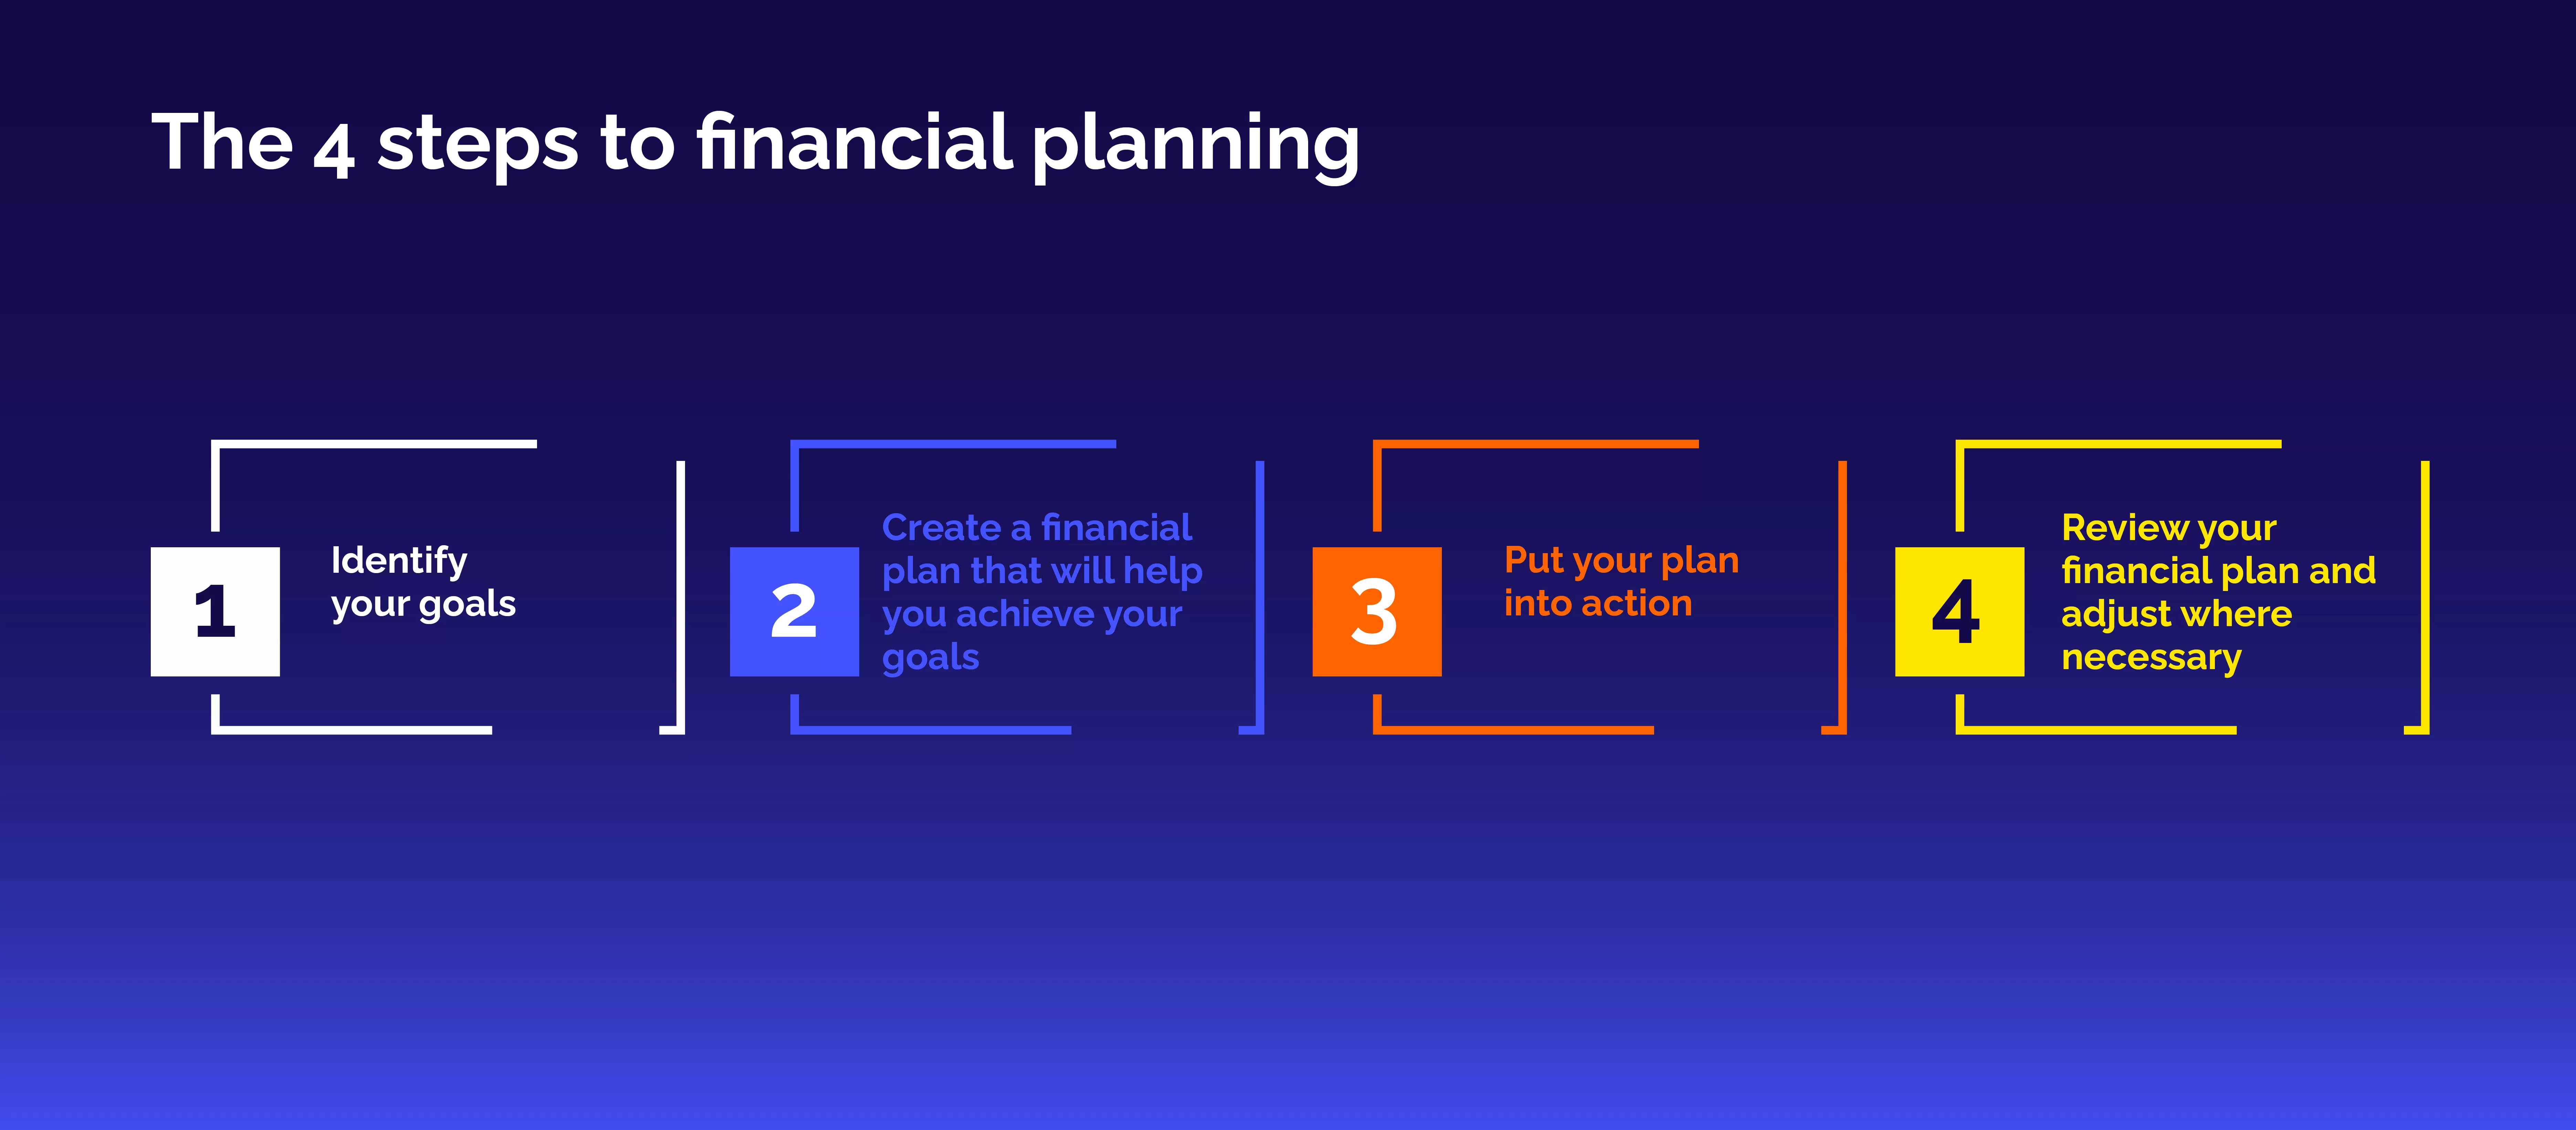 The 4-steps of financial planning and how to get started